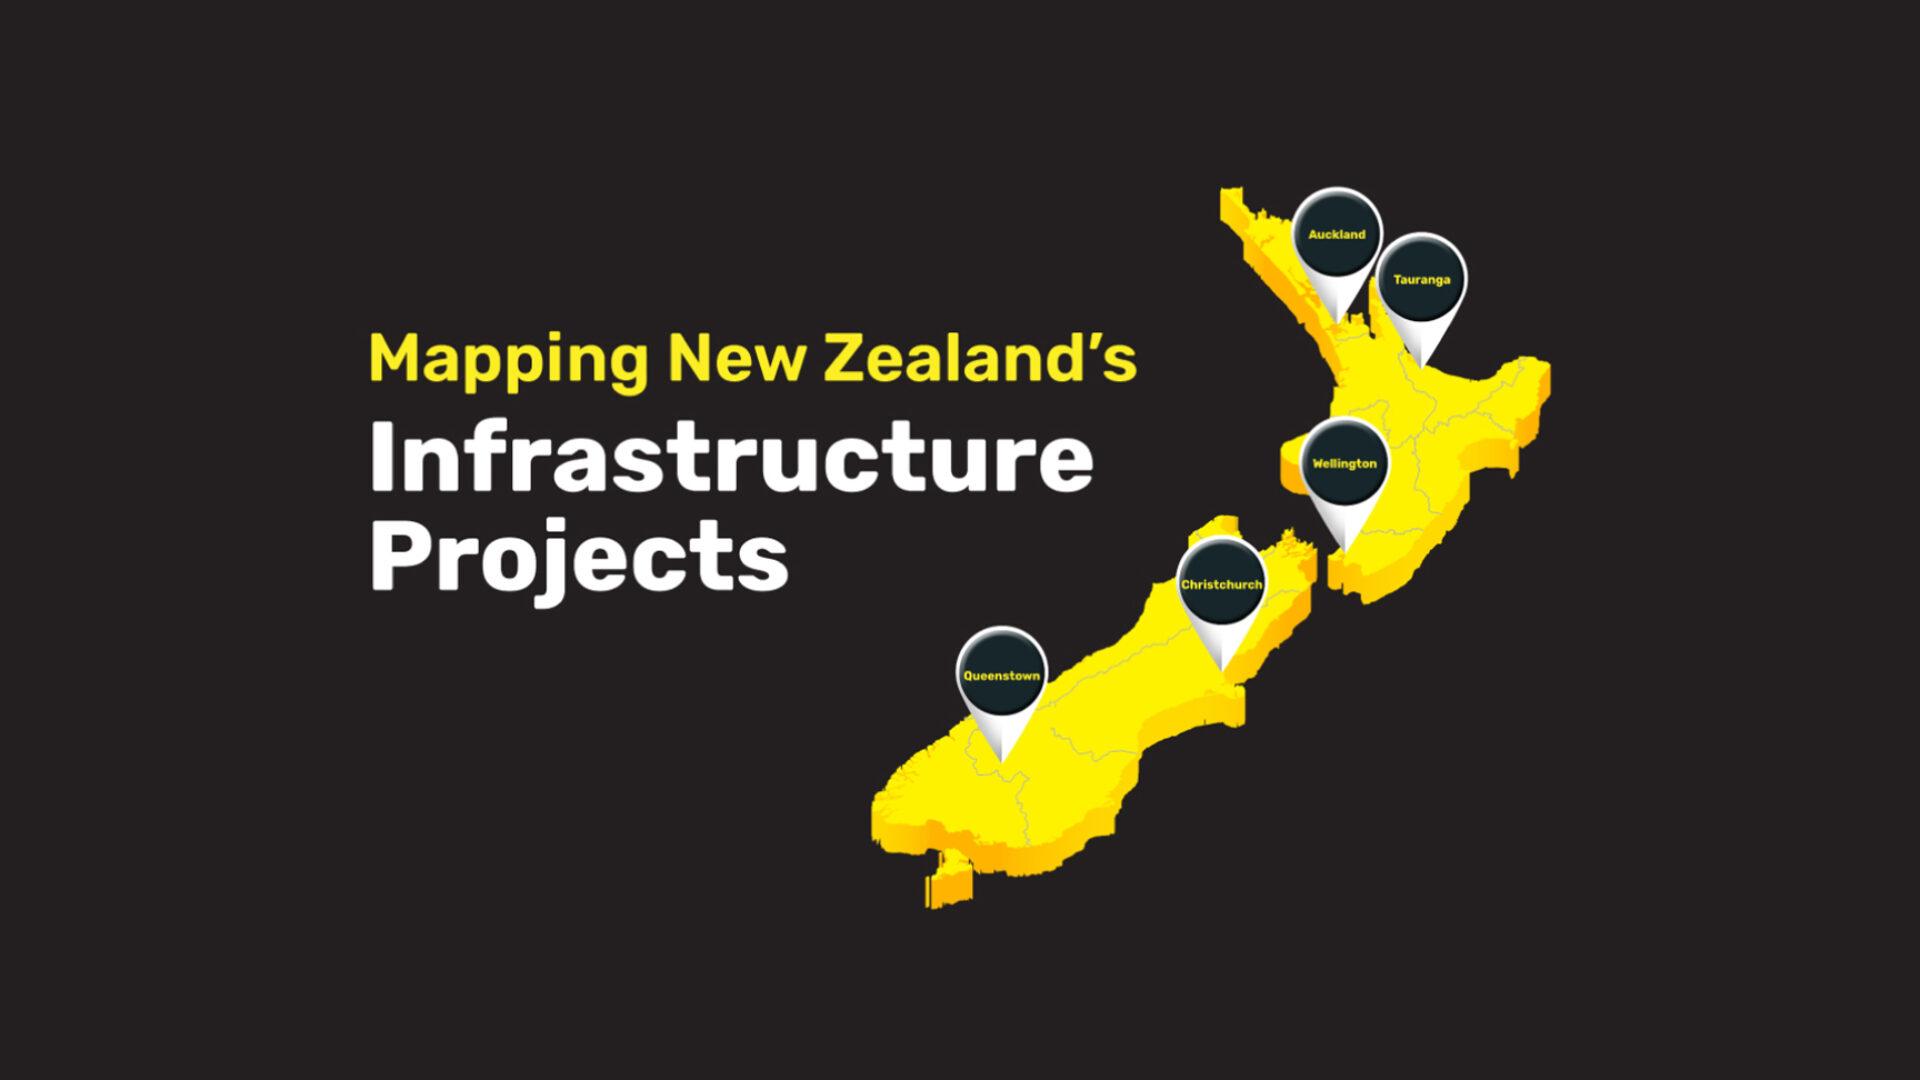 Visualising New Zealand’s infrastructure projects